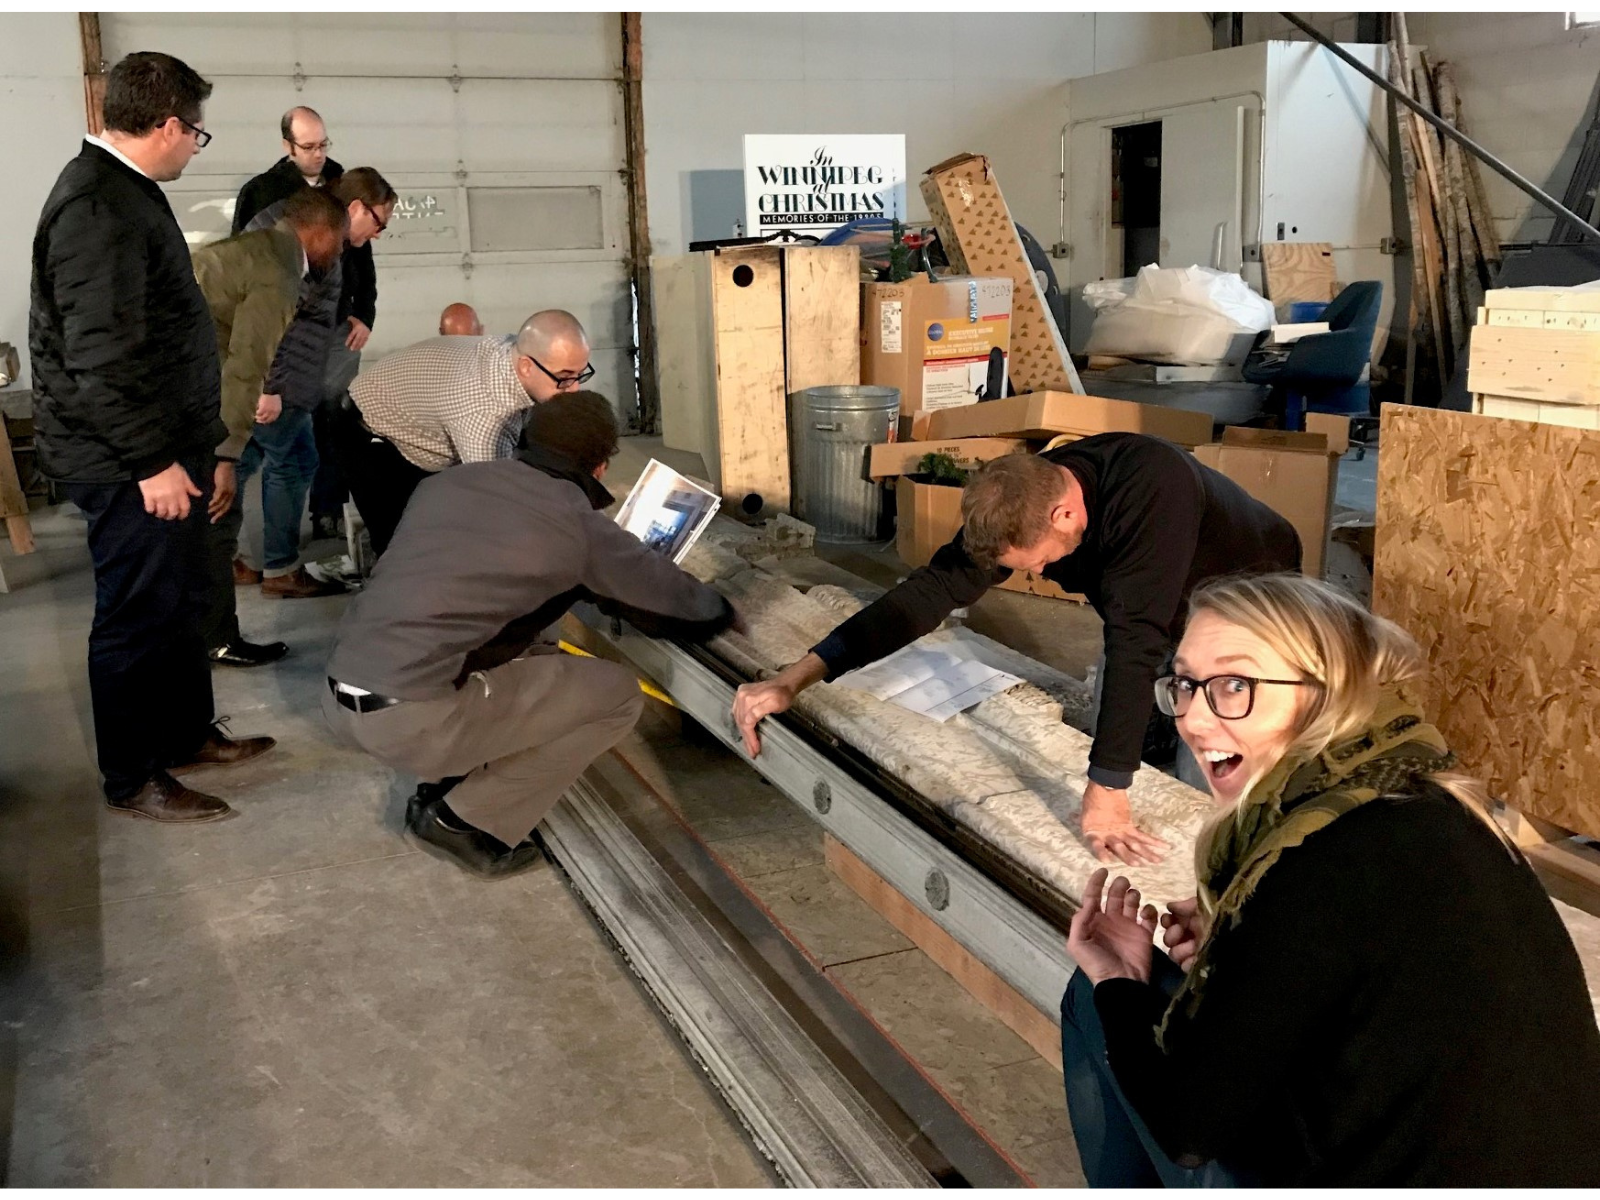 Several individuals standing and crouching around the pieces of the Eaton’s lintel and metal support beam in a storage space. Conservator Carolyn Sirett is turned, facing the camera, grinning.